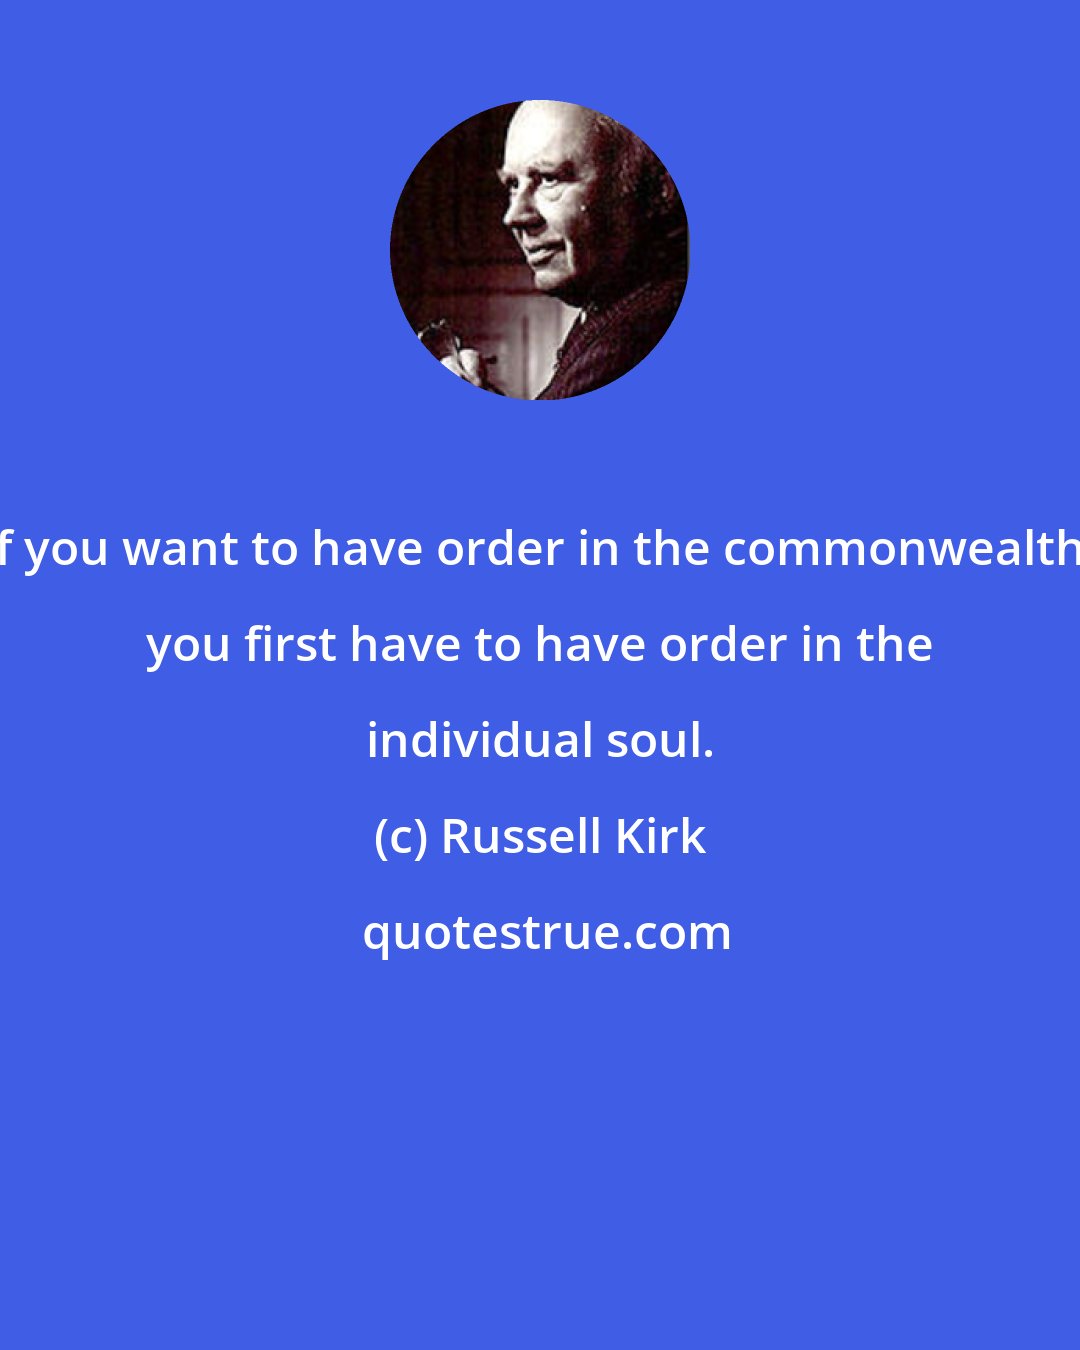 Russell Kirk: If you want to have order in the commonwealth, you first have to have order in the individual soul.